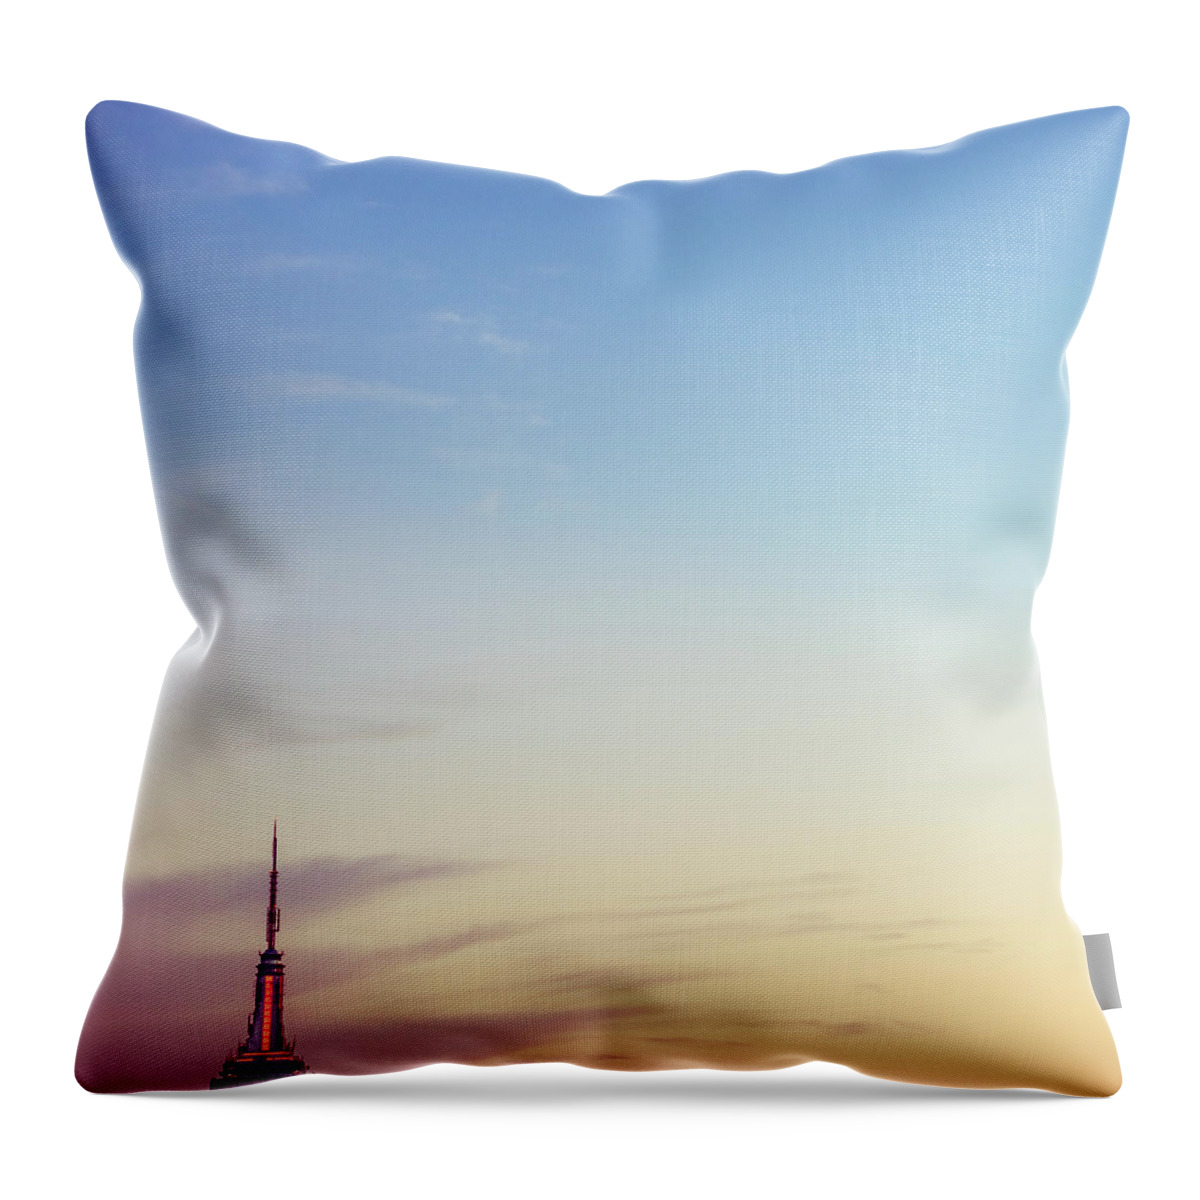 Empty Throw Pillow featuring the photograph The Empire State Building by Ferrantraite